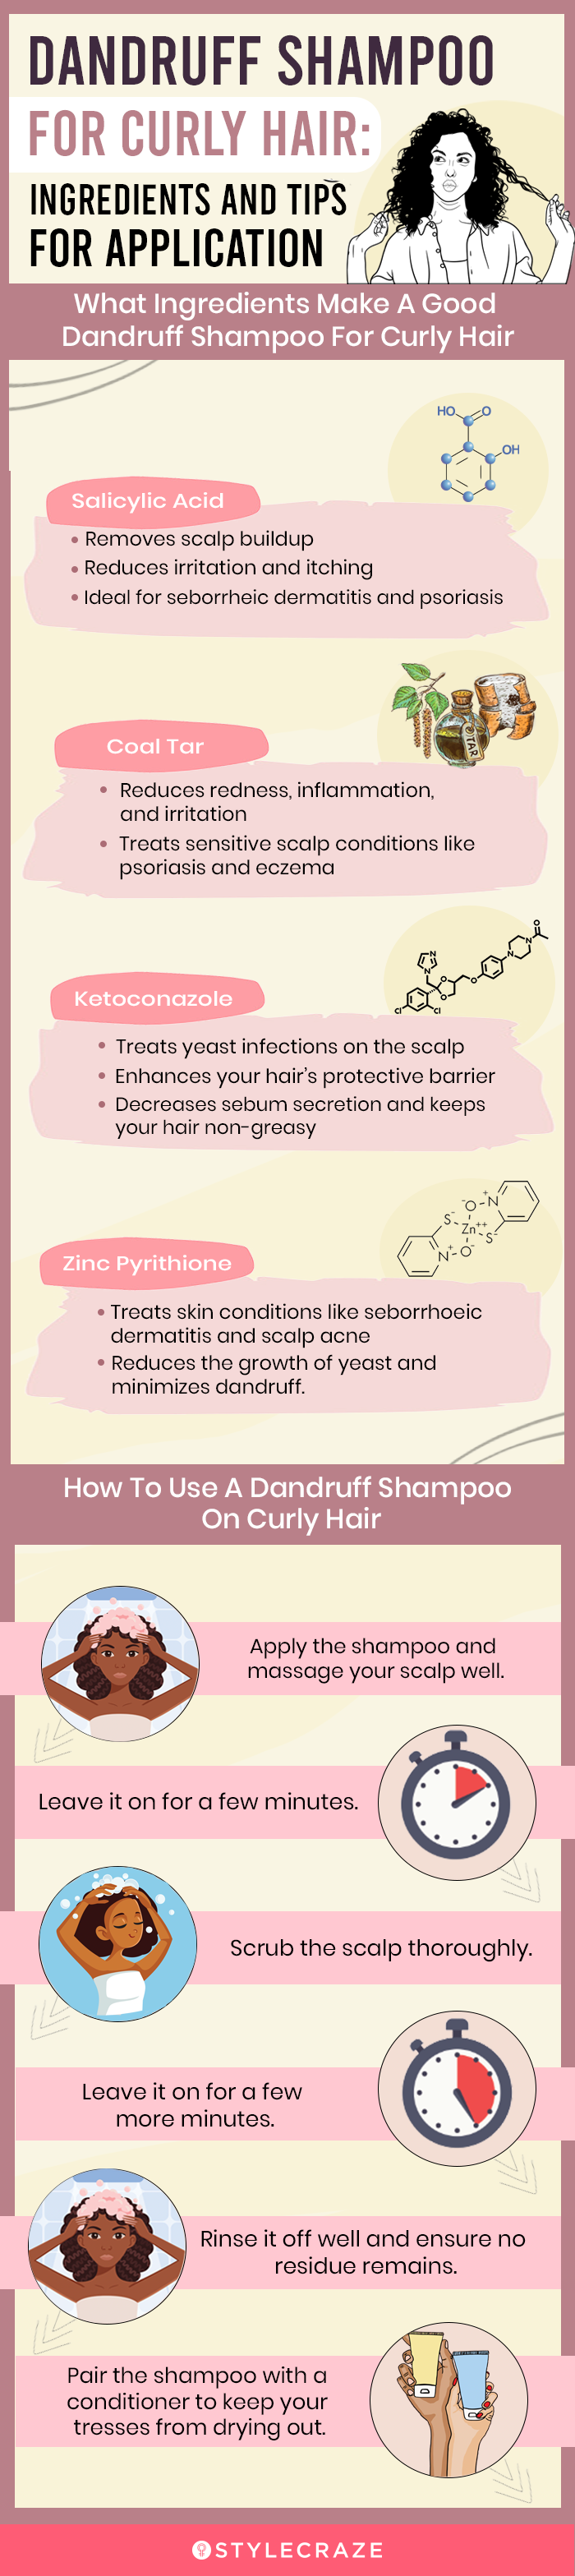 Dandruff Shampoo For Curly Hair: Ingredients And Tips For Application